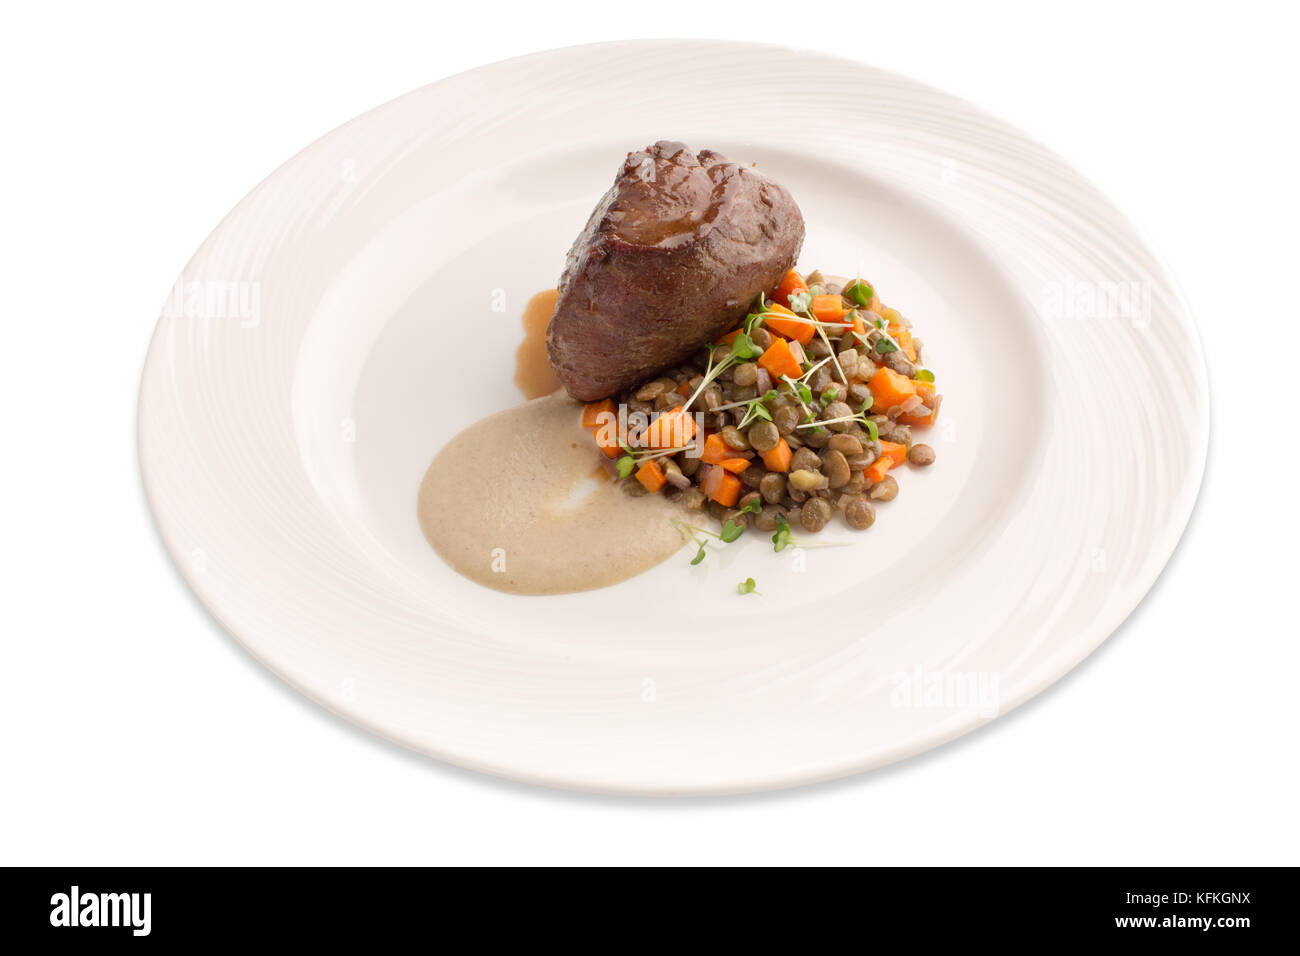 Fillet mignon lentil and sauce on plate isolate Stock Photo